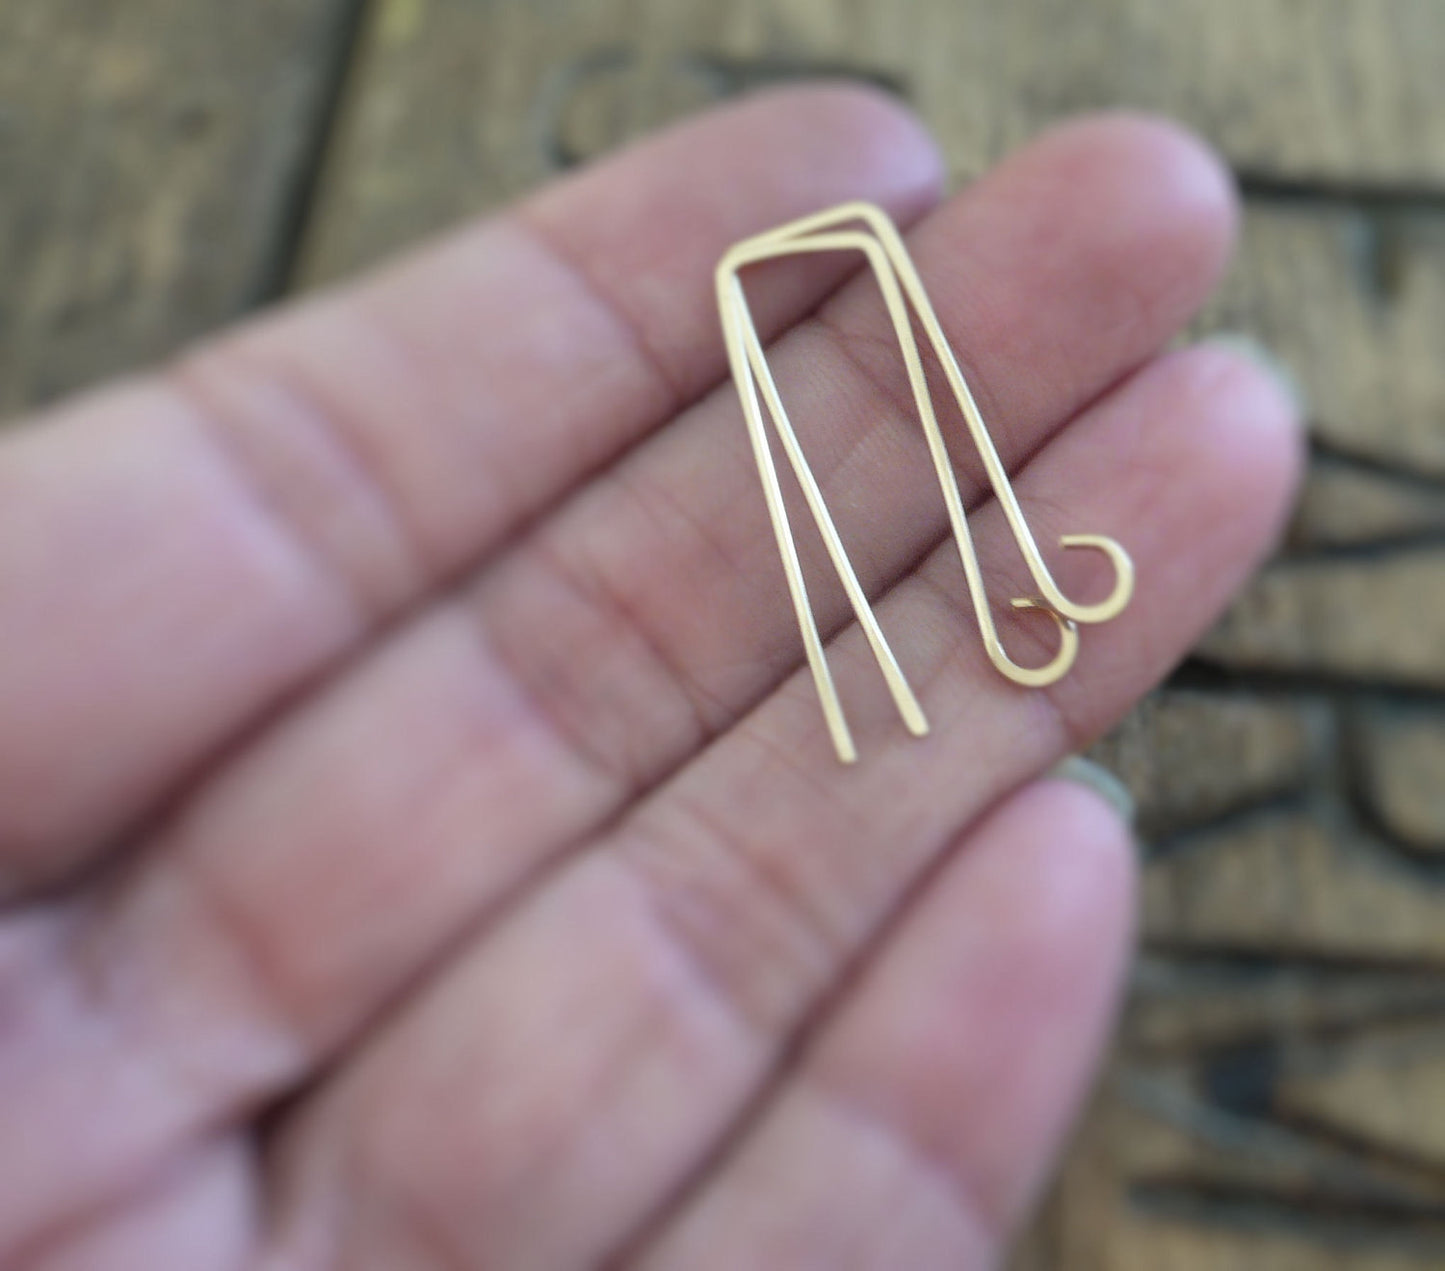 12 pairs of my Millstone 14kt Goldfill Earwires - Handmade. Handforged